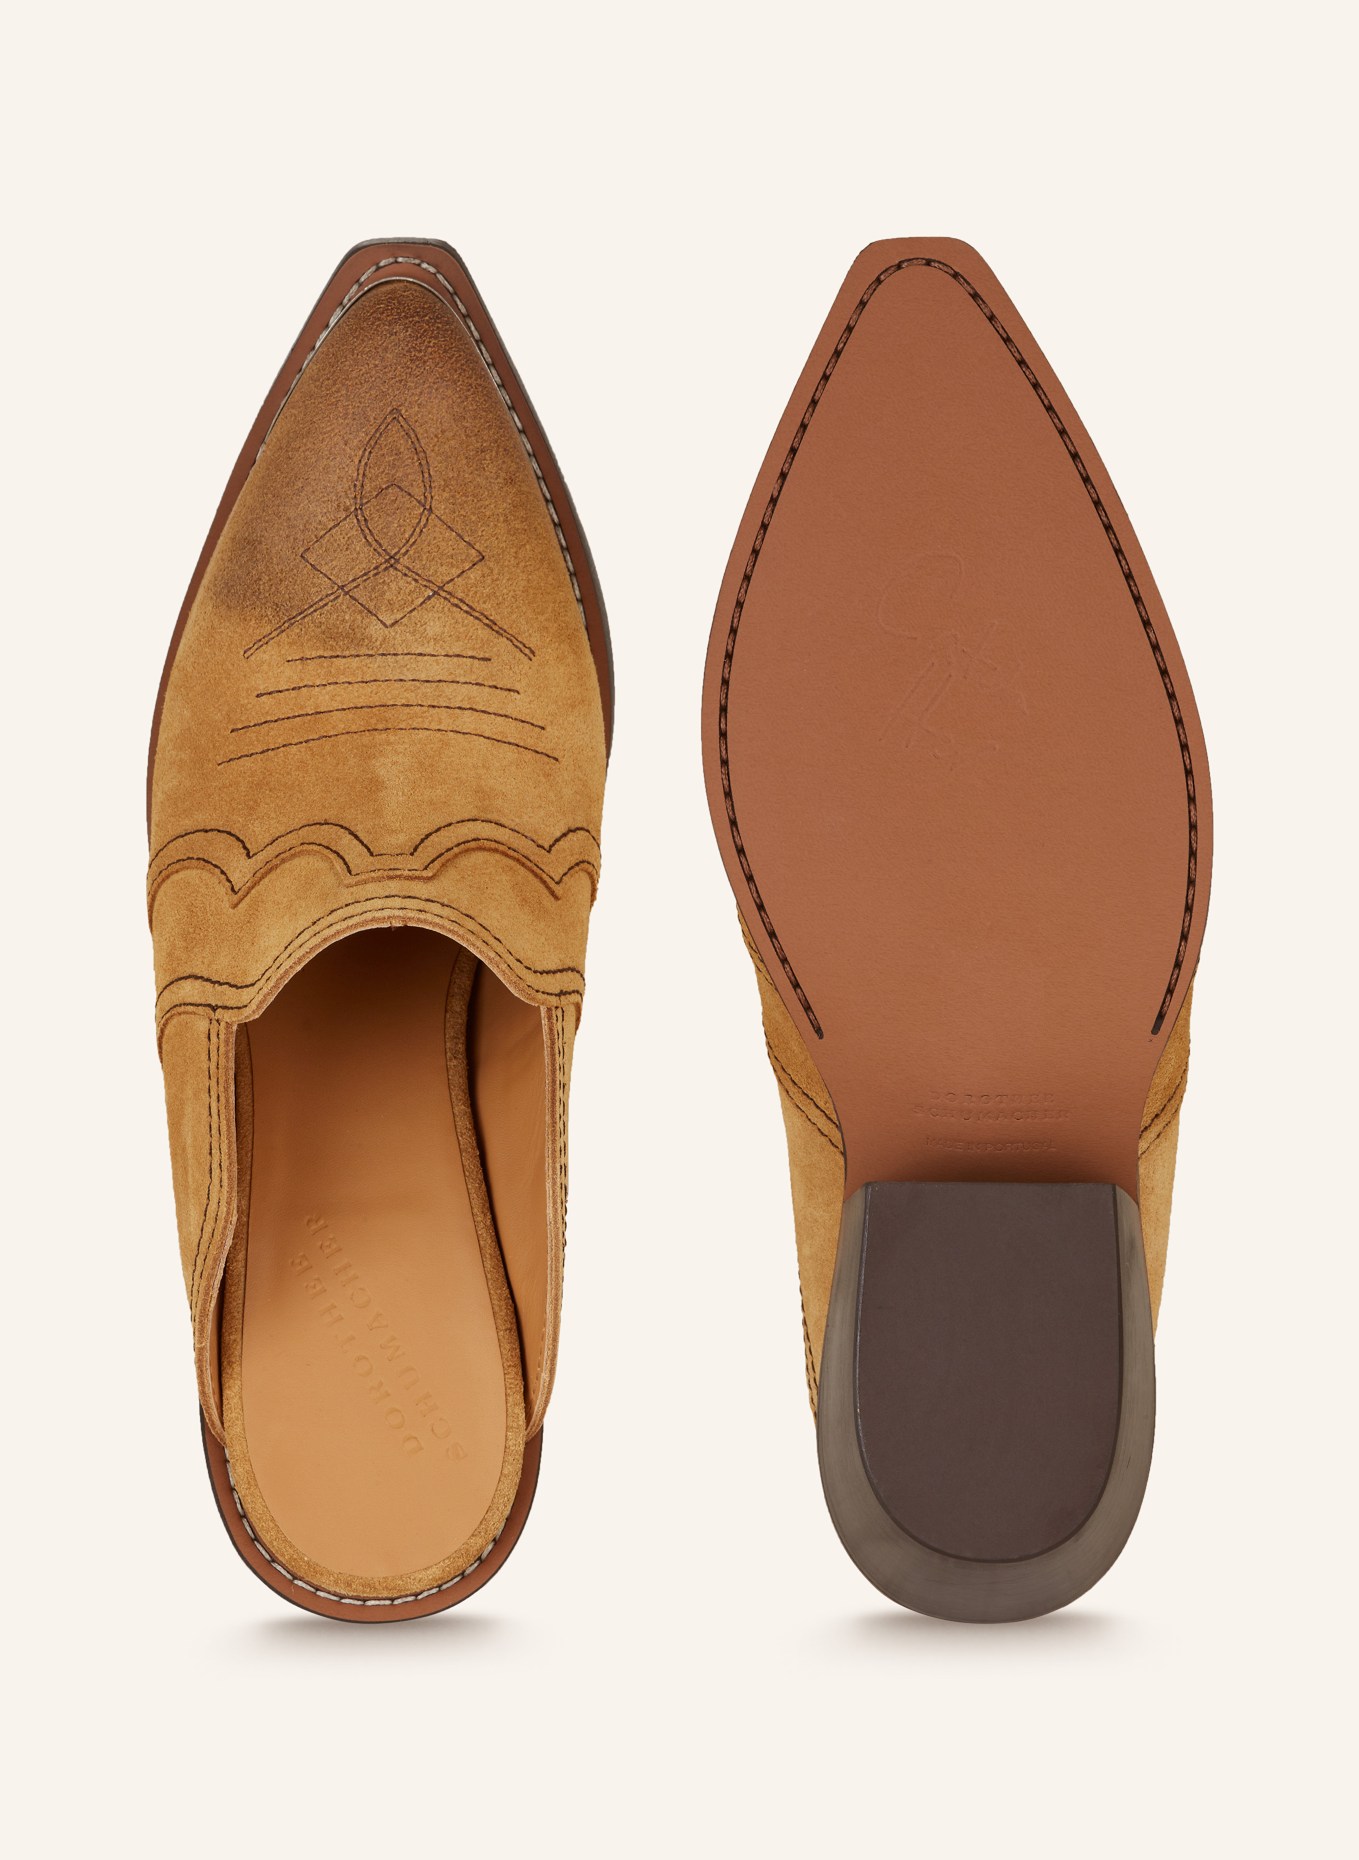 DOROTHEE SCHUMACHER Mules, Color: LIGHT BROWN (Image 5)